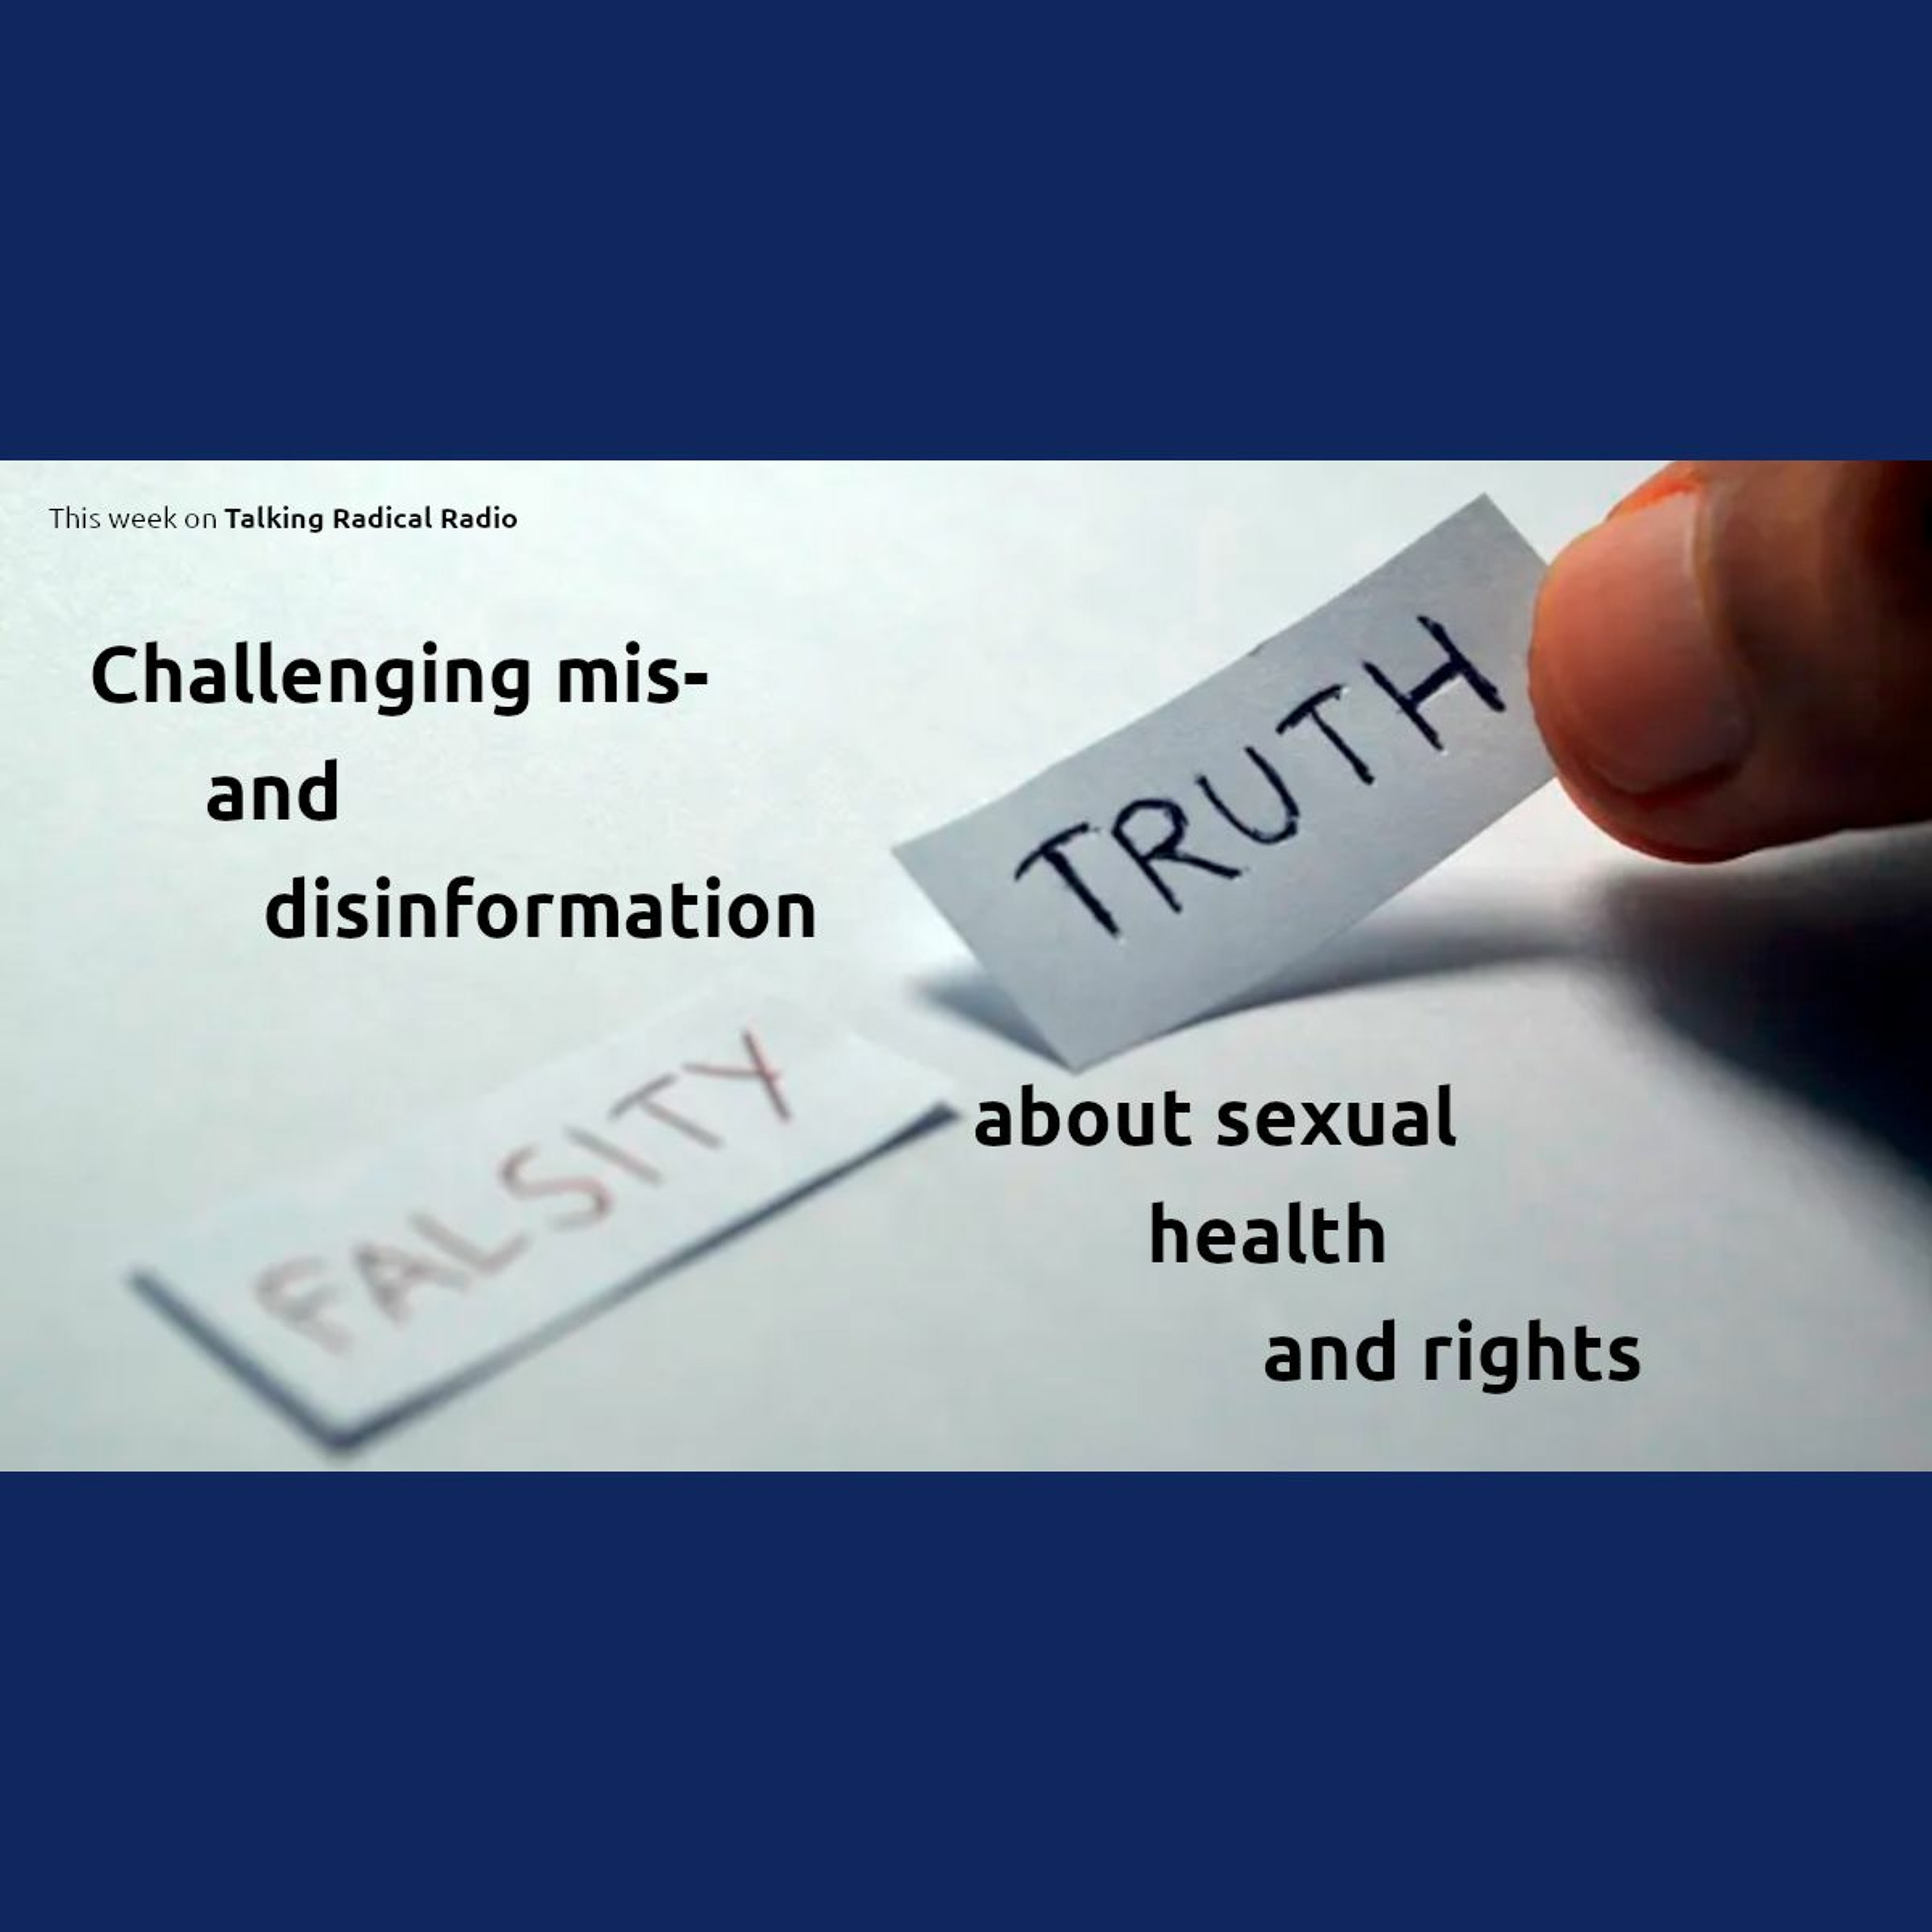 Challenging mis- and disinformation about sexual health and rights